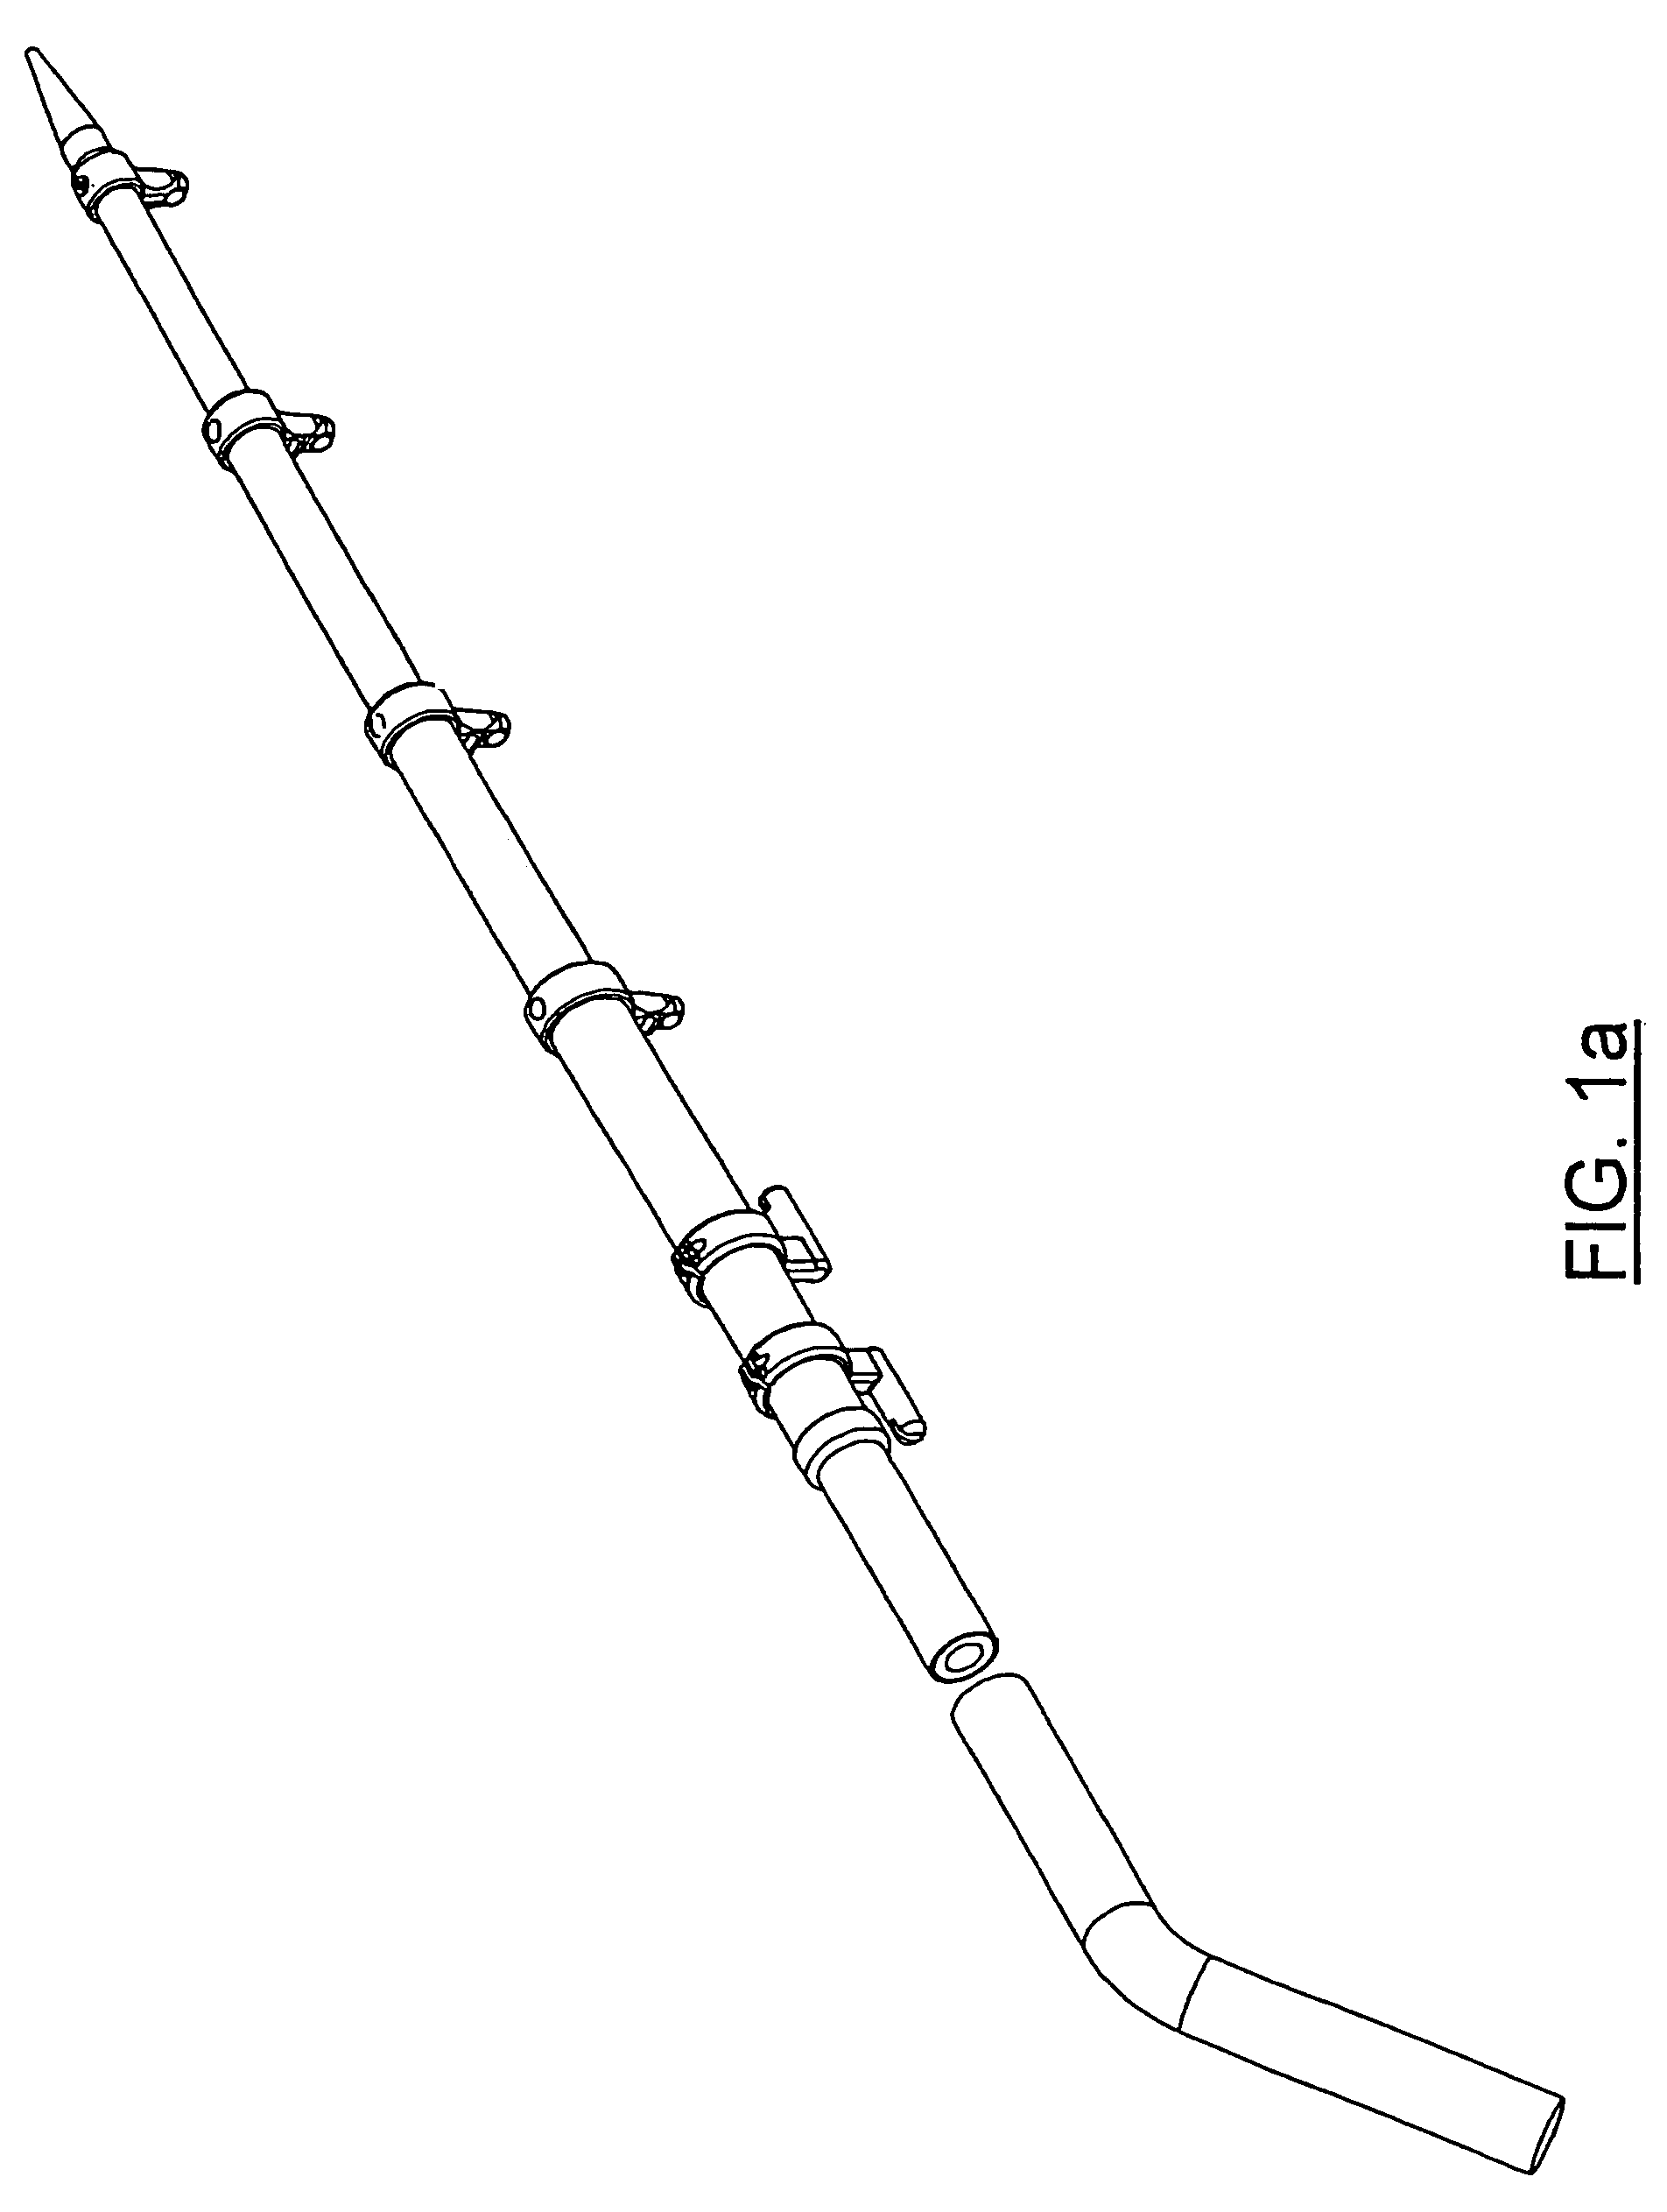 Telescoping outrigger boom with tube locking mechanisms